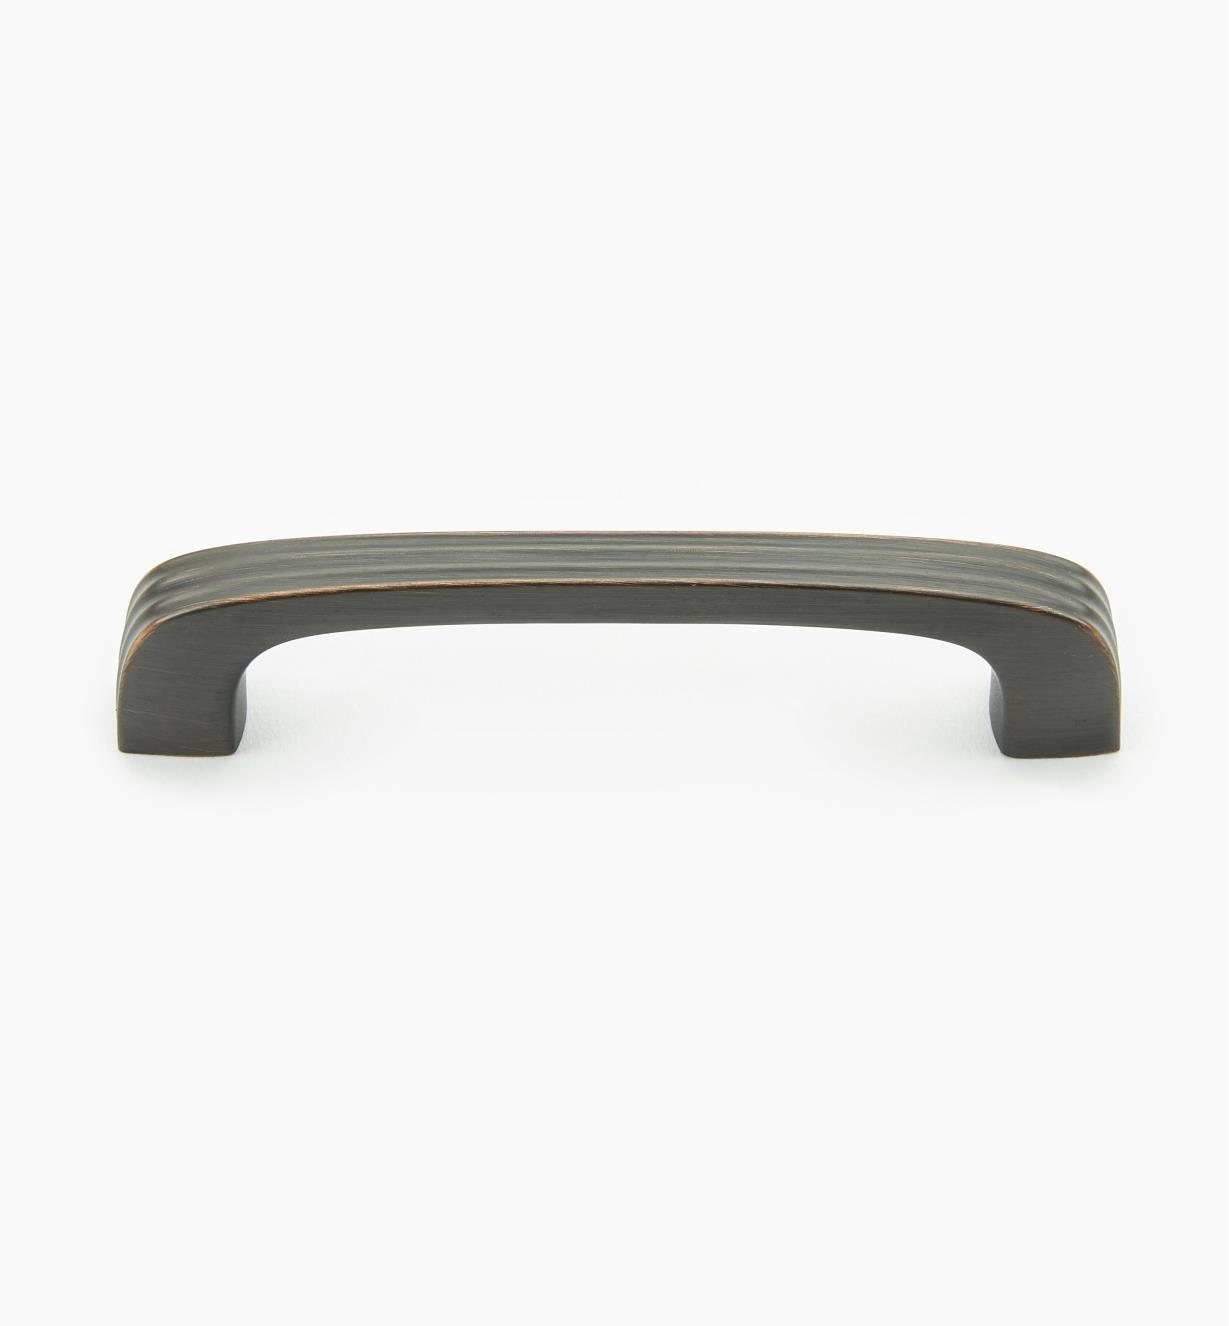 02A1382 - Oil-Rubbed Bronze Large Handle